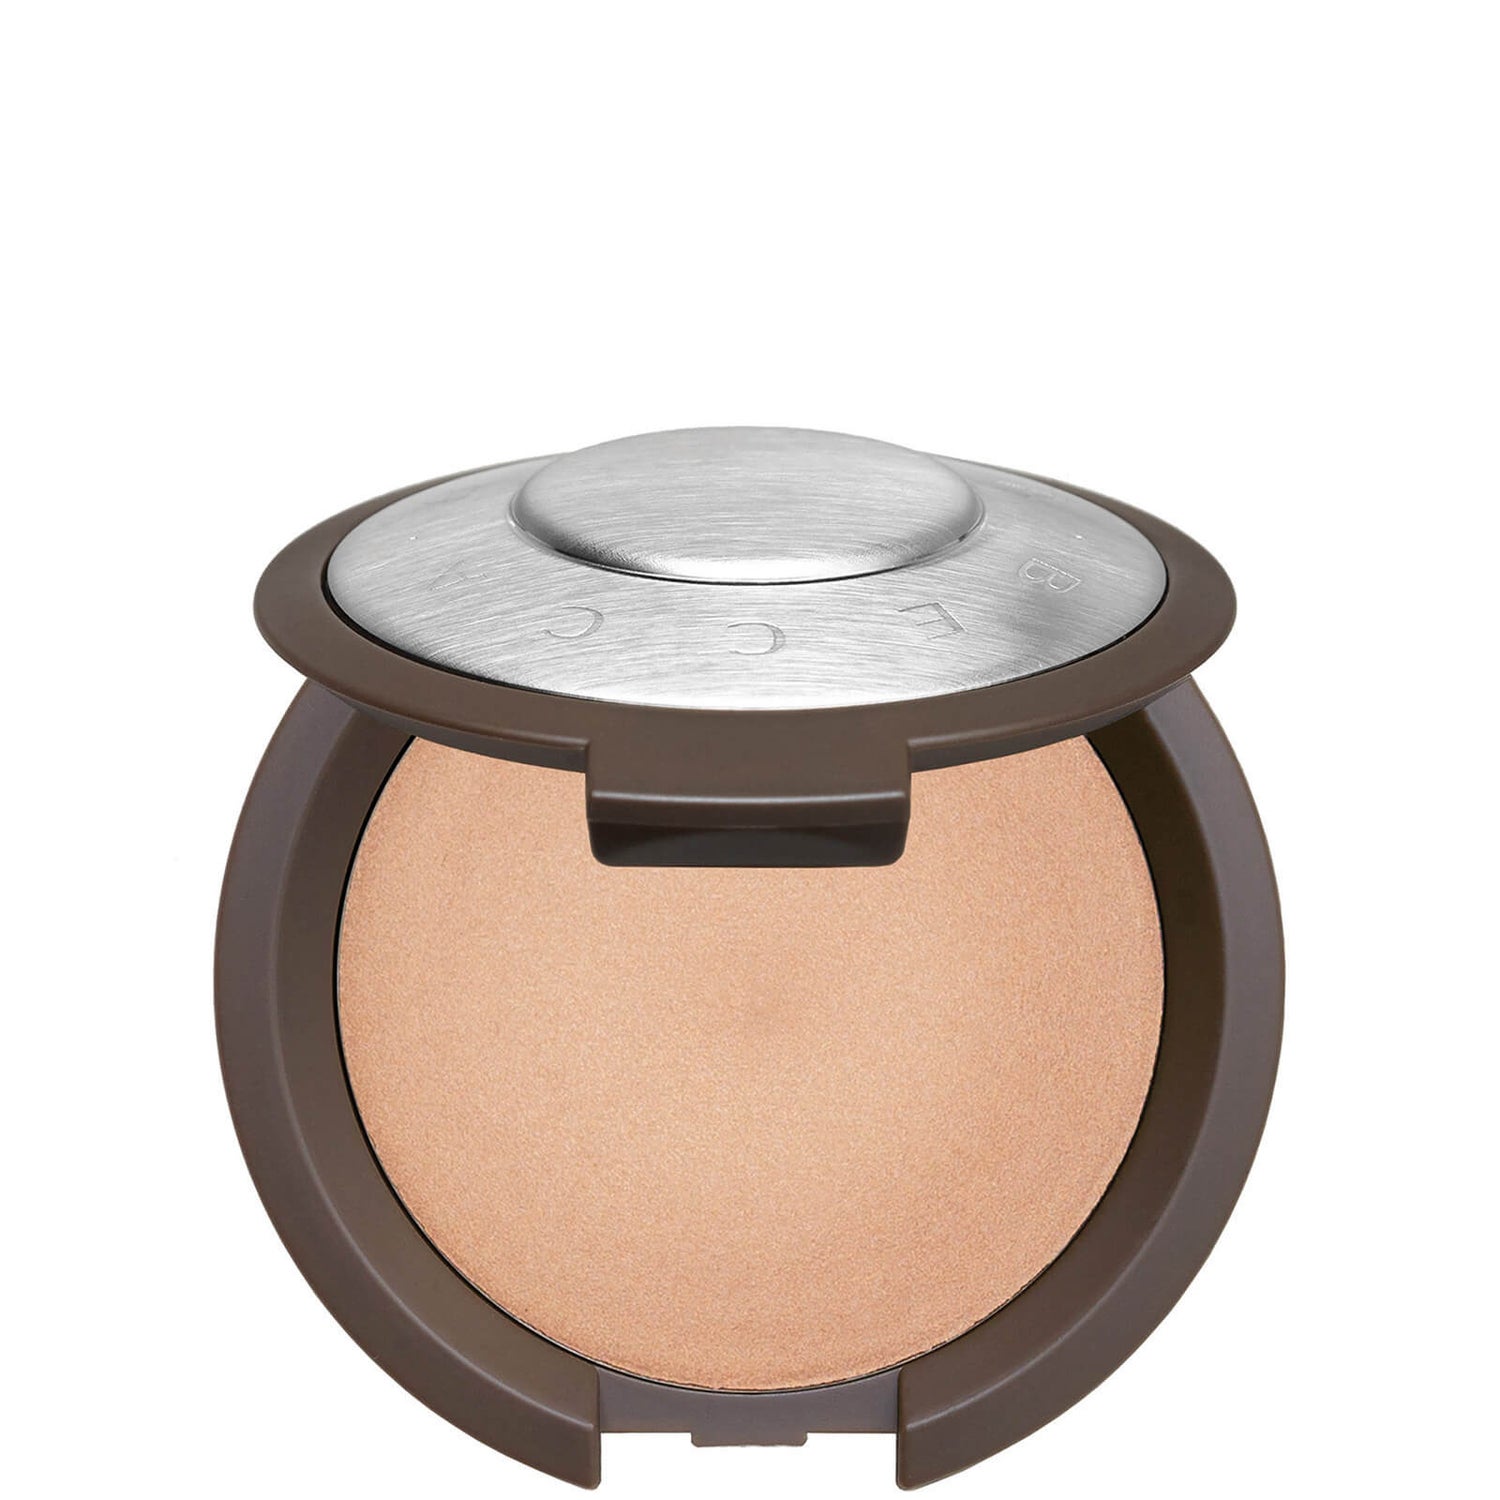 BECCA BECCA x Jaclyn Hill Shimmering Skin Perfector Poured - Champagne Pop